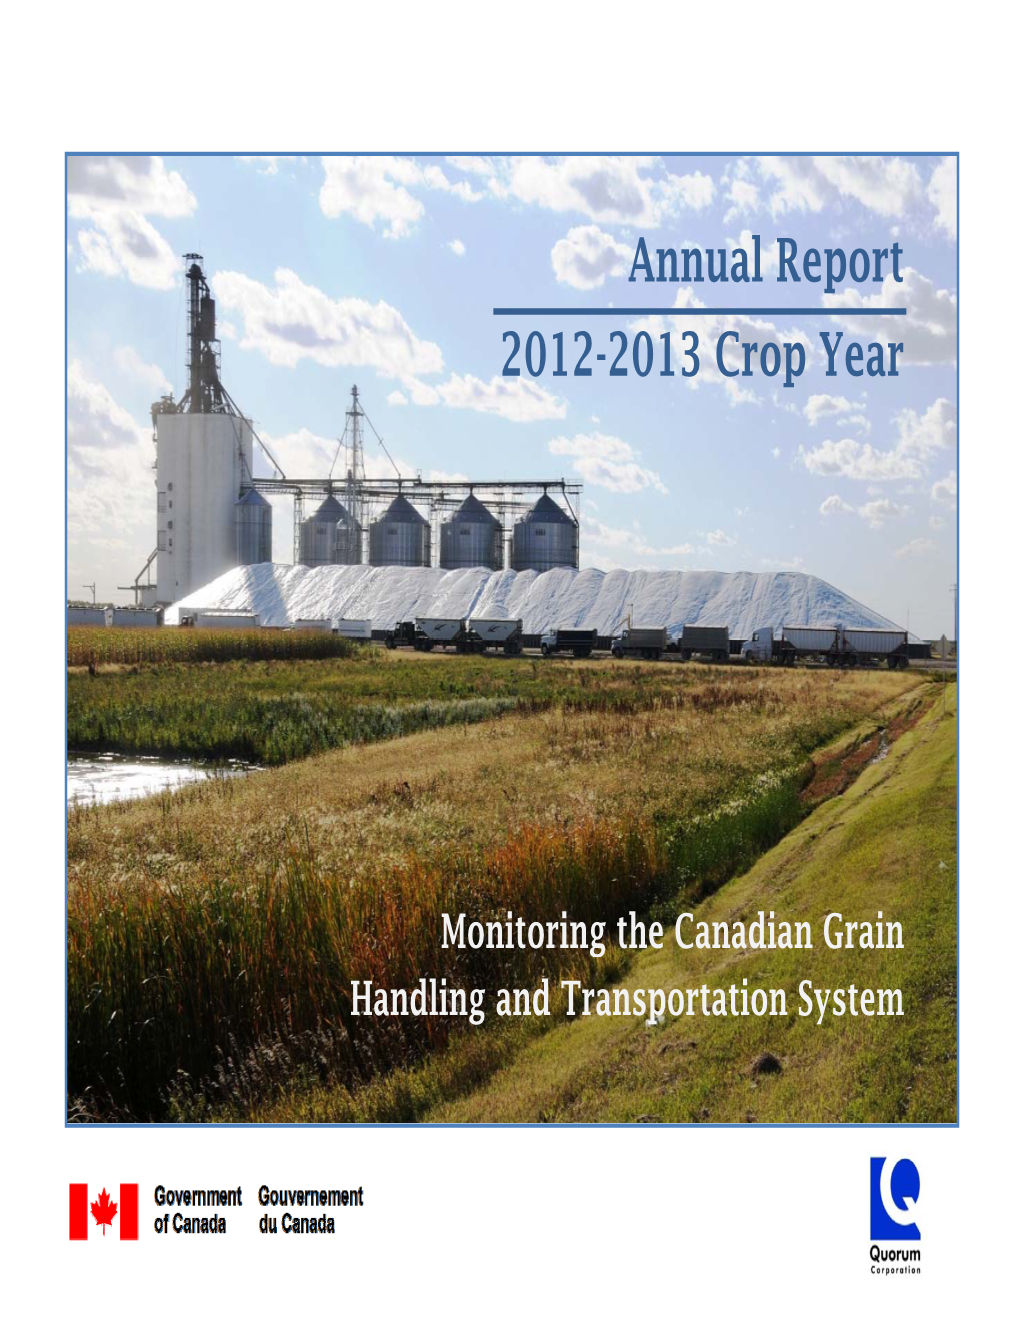 Annual Report 2012-2013 Crop Year